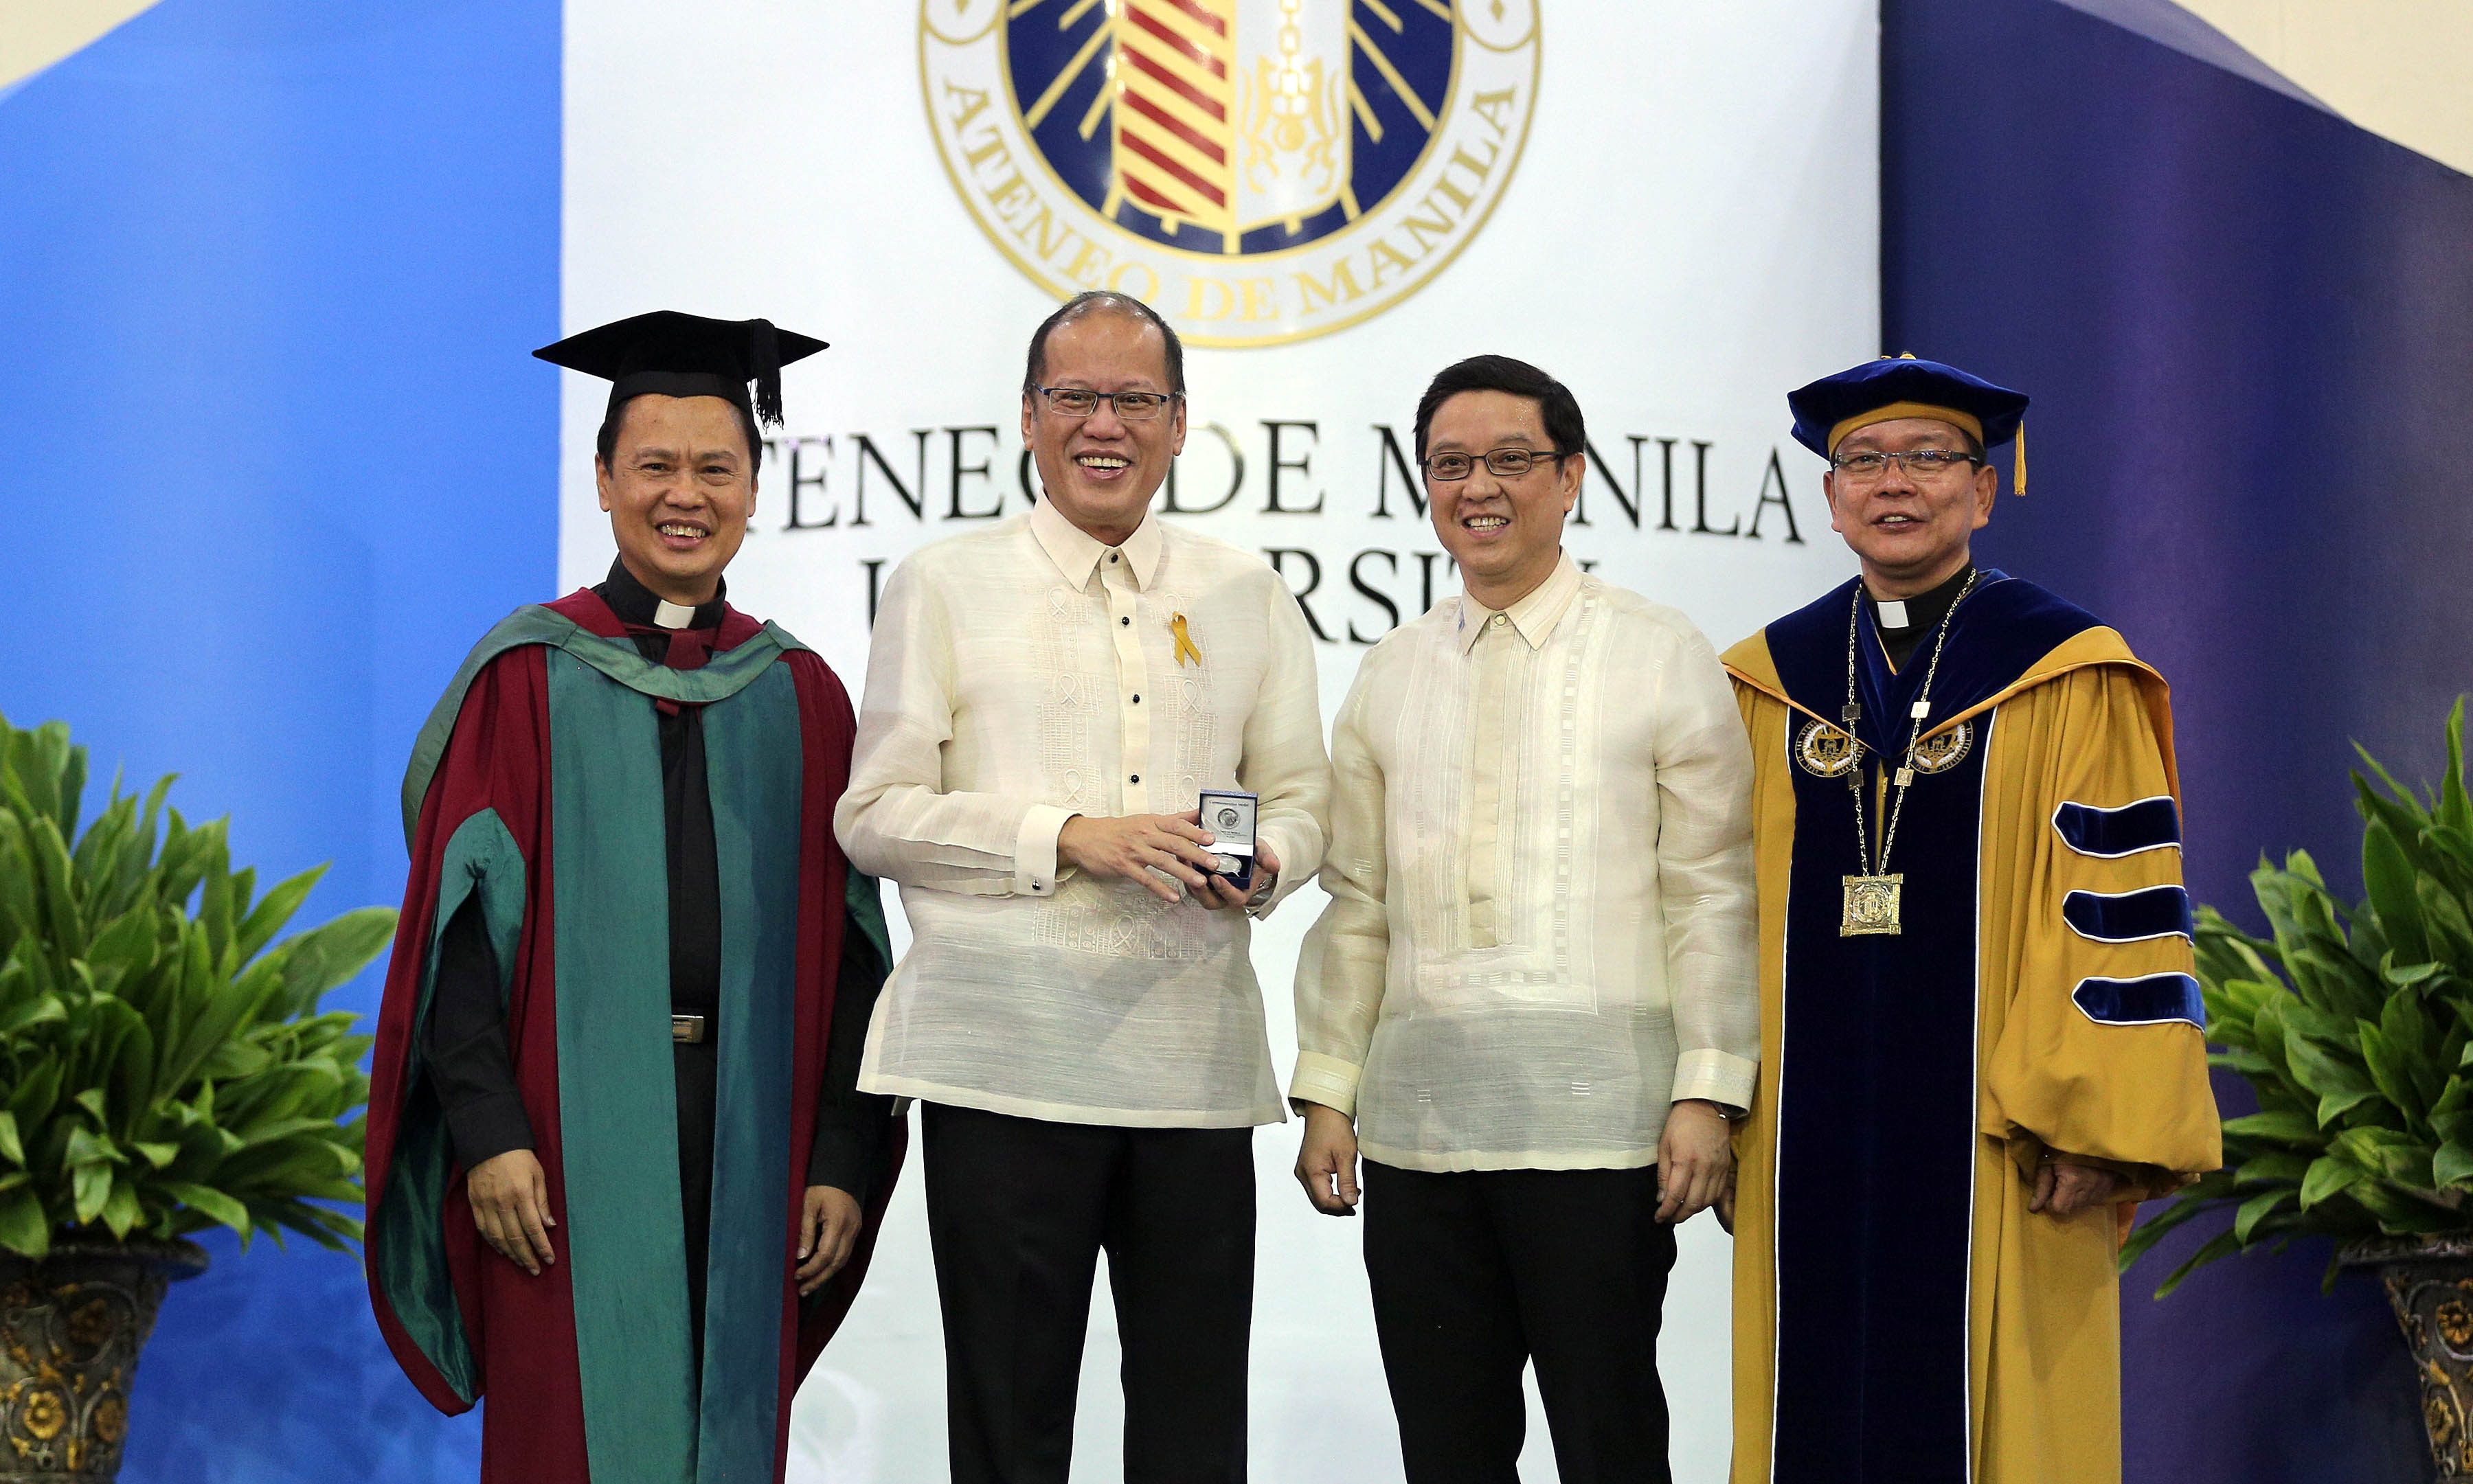 HOMECOMING. President Benigno Aquino III returns to his alma mater, Ateneo de Manila University, days before he steps down from office to deliver a commencement speech. Photo by Gil Nartea/Malacañang Photo Bureau 